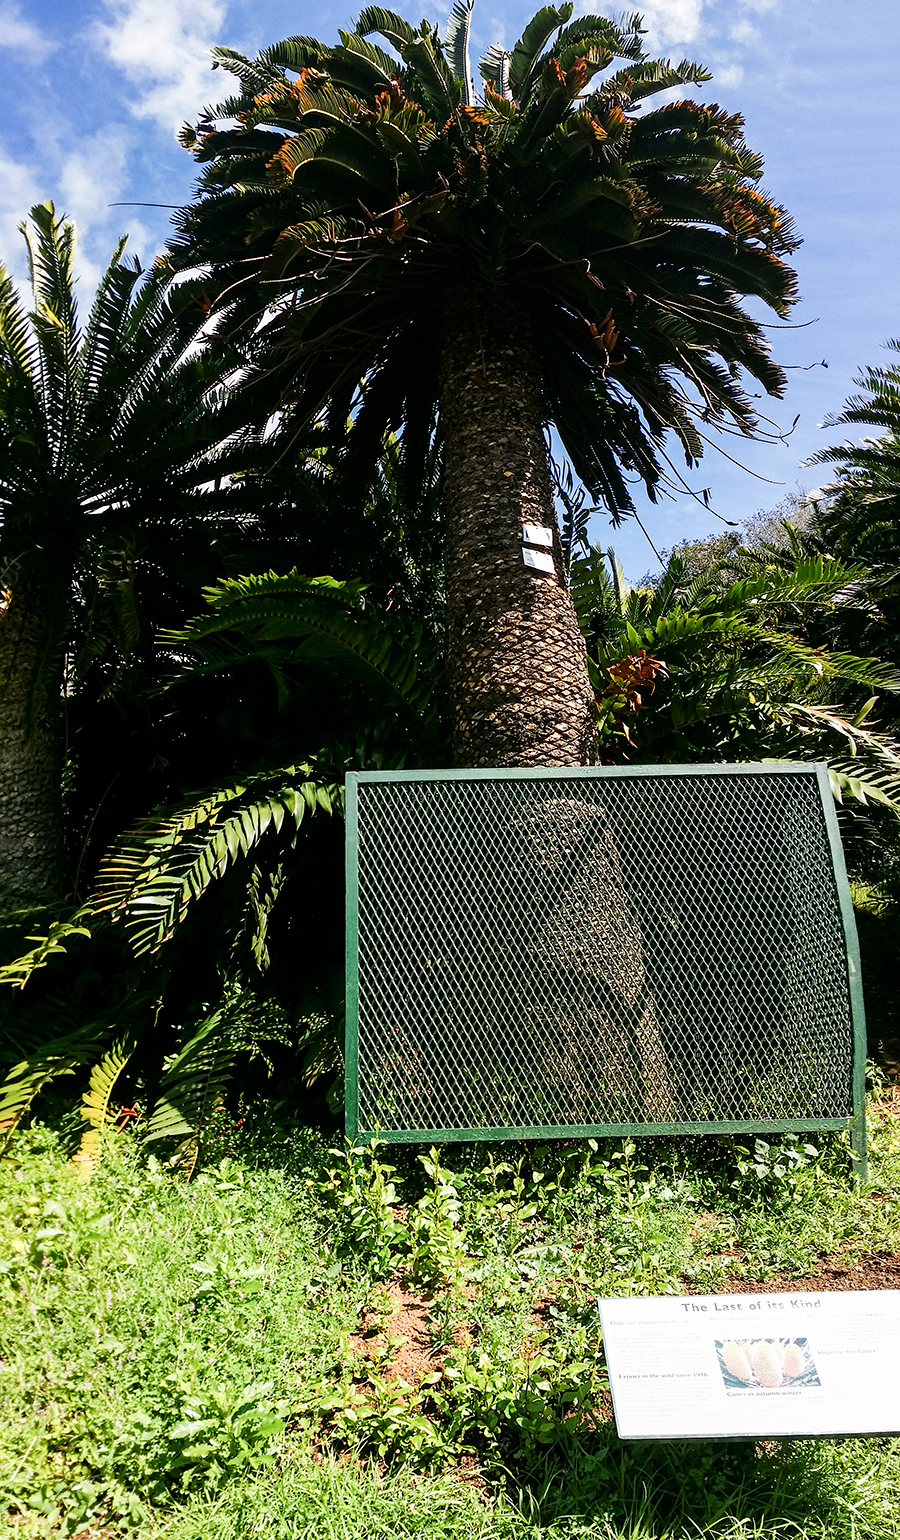 Last cycad of its kind at Kirstenbosch, South Africa.